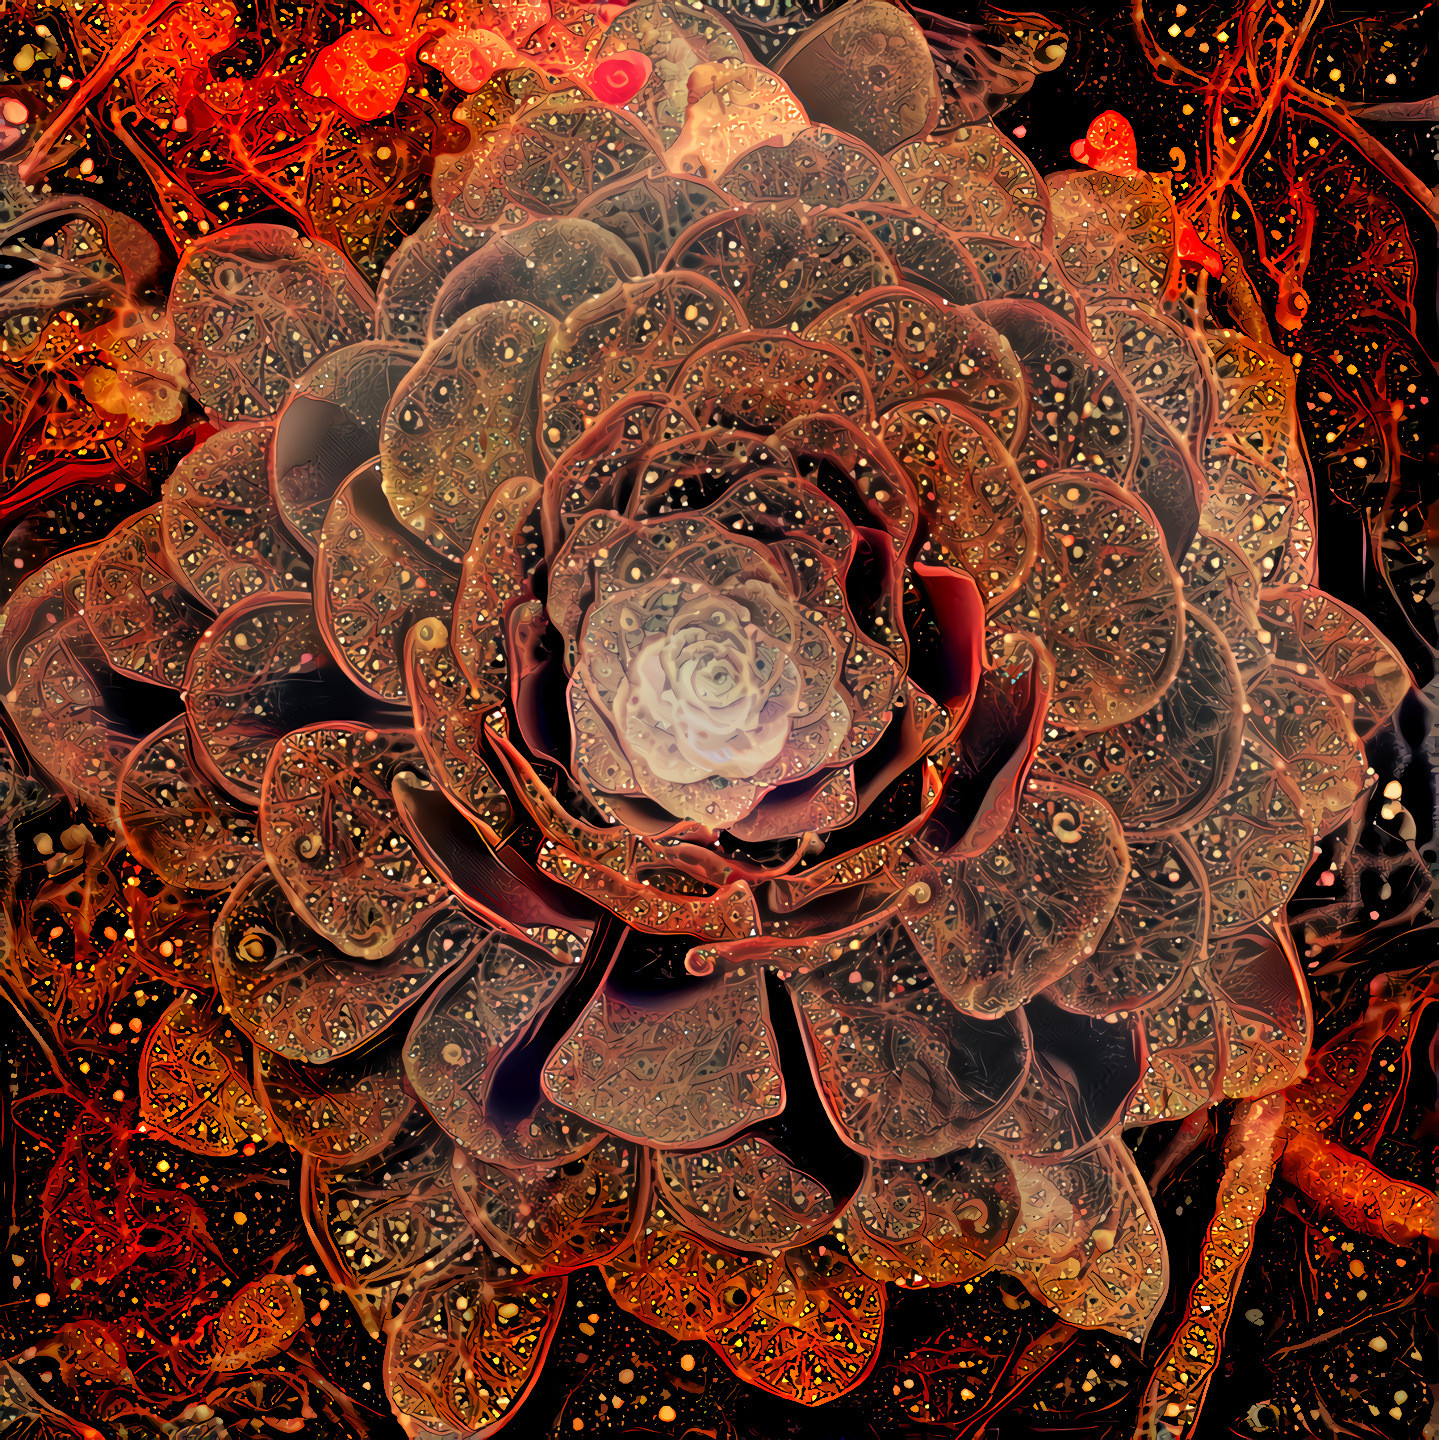 ♧Plant Power: the ♡Mysticism of ◇Fractal Growth...